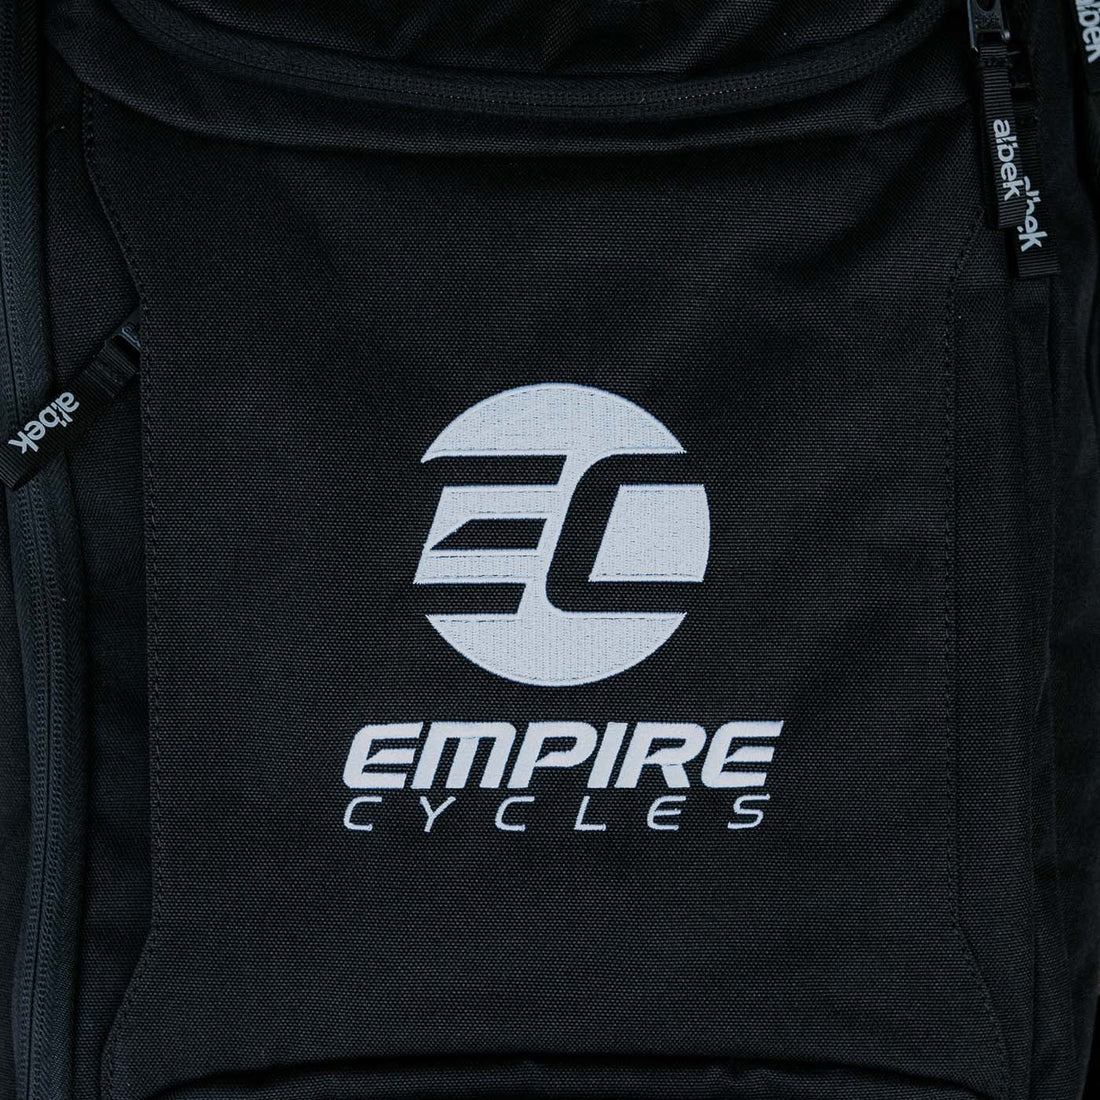 Accessories Brand - Empire Cycles